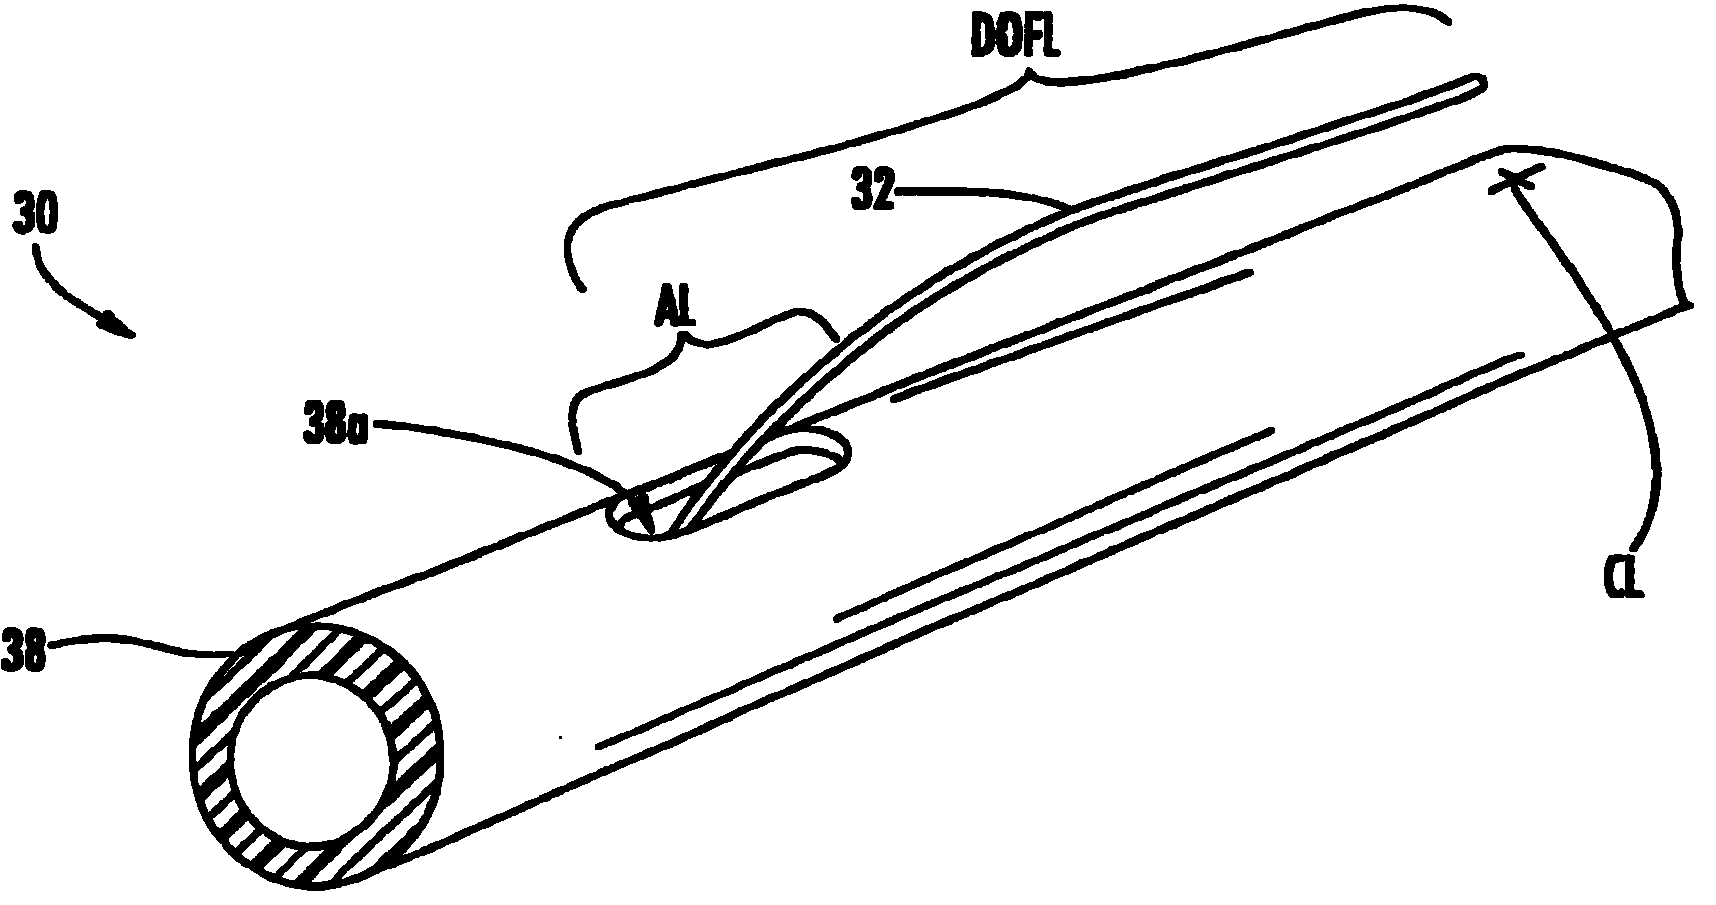 Fiber optic distribution cables and structures therefor